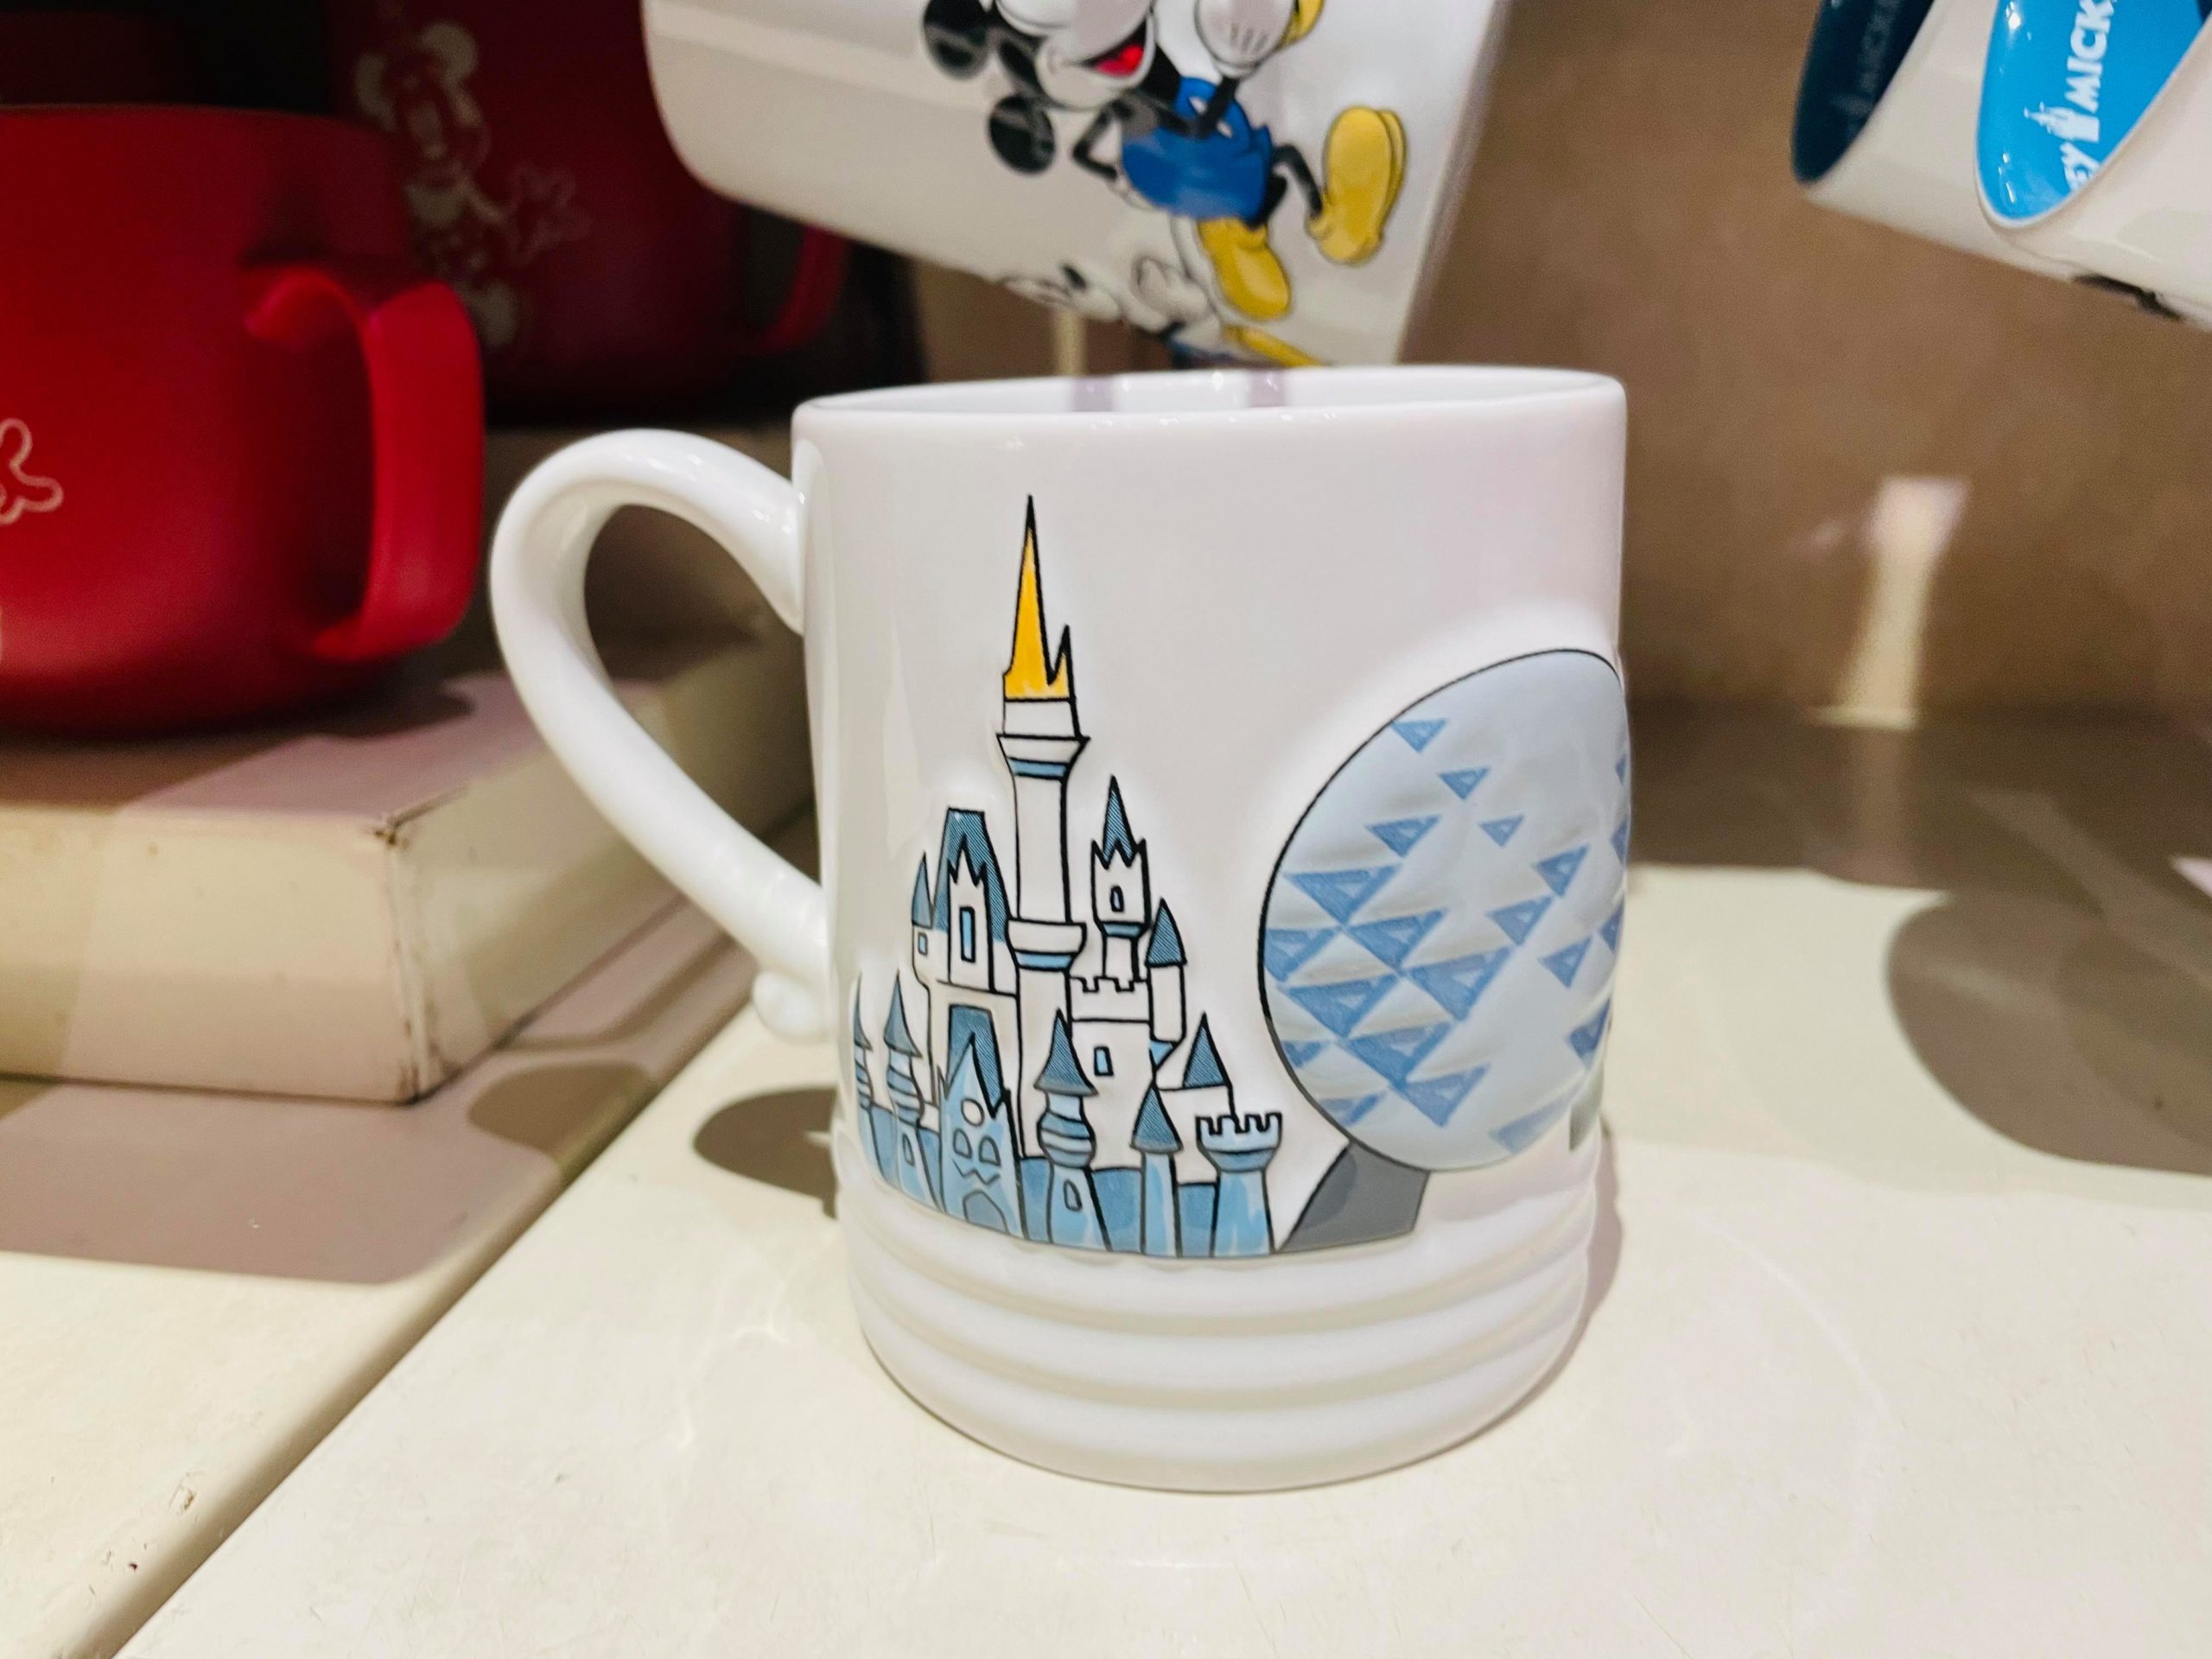 This Walt Disney World 50th anniversary mug will put a little magic in your  mornings